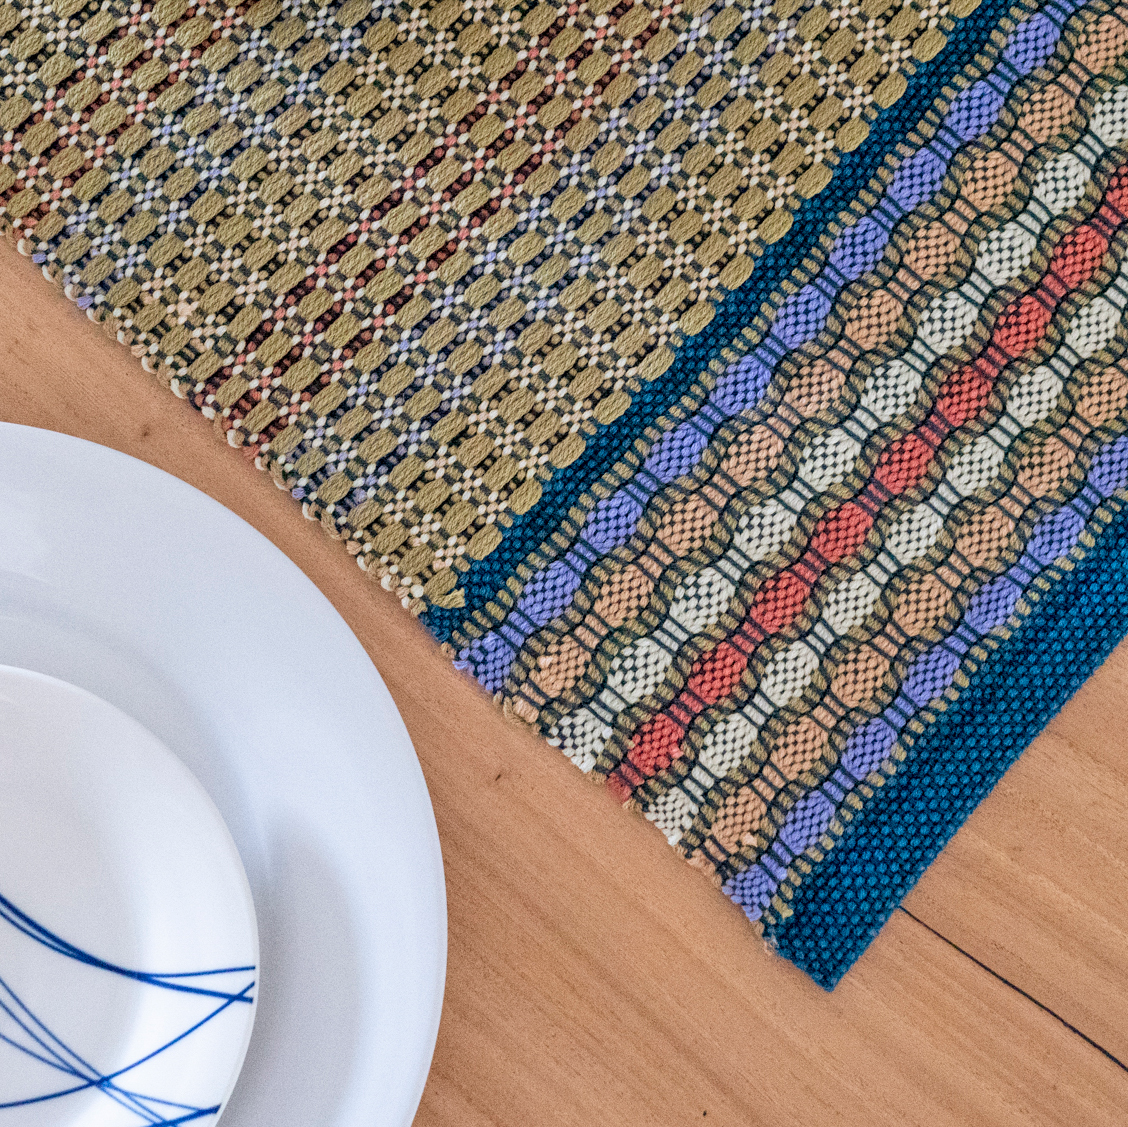 Rigid Heddle Weaving: Easy Pick-up